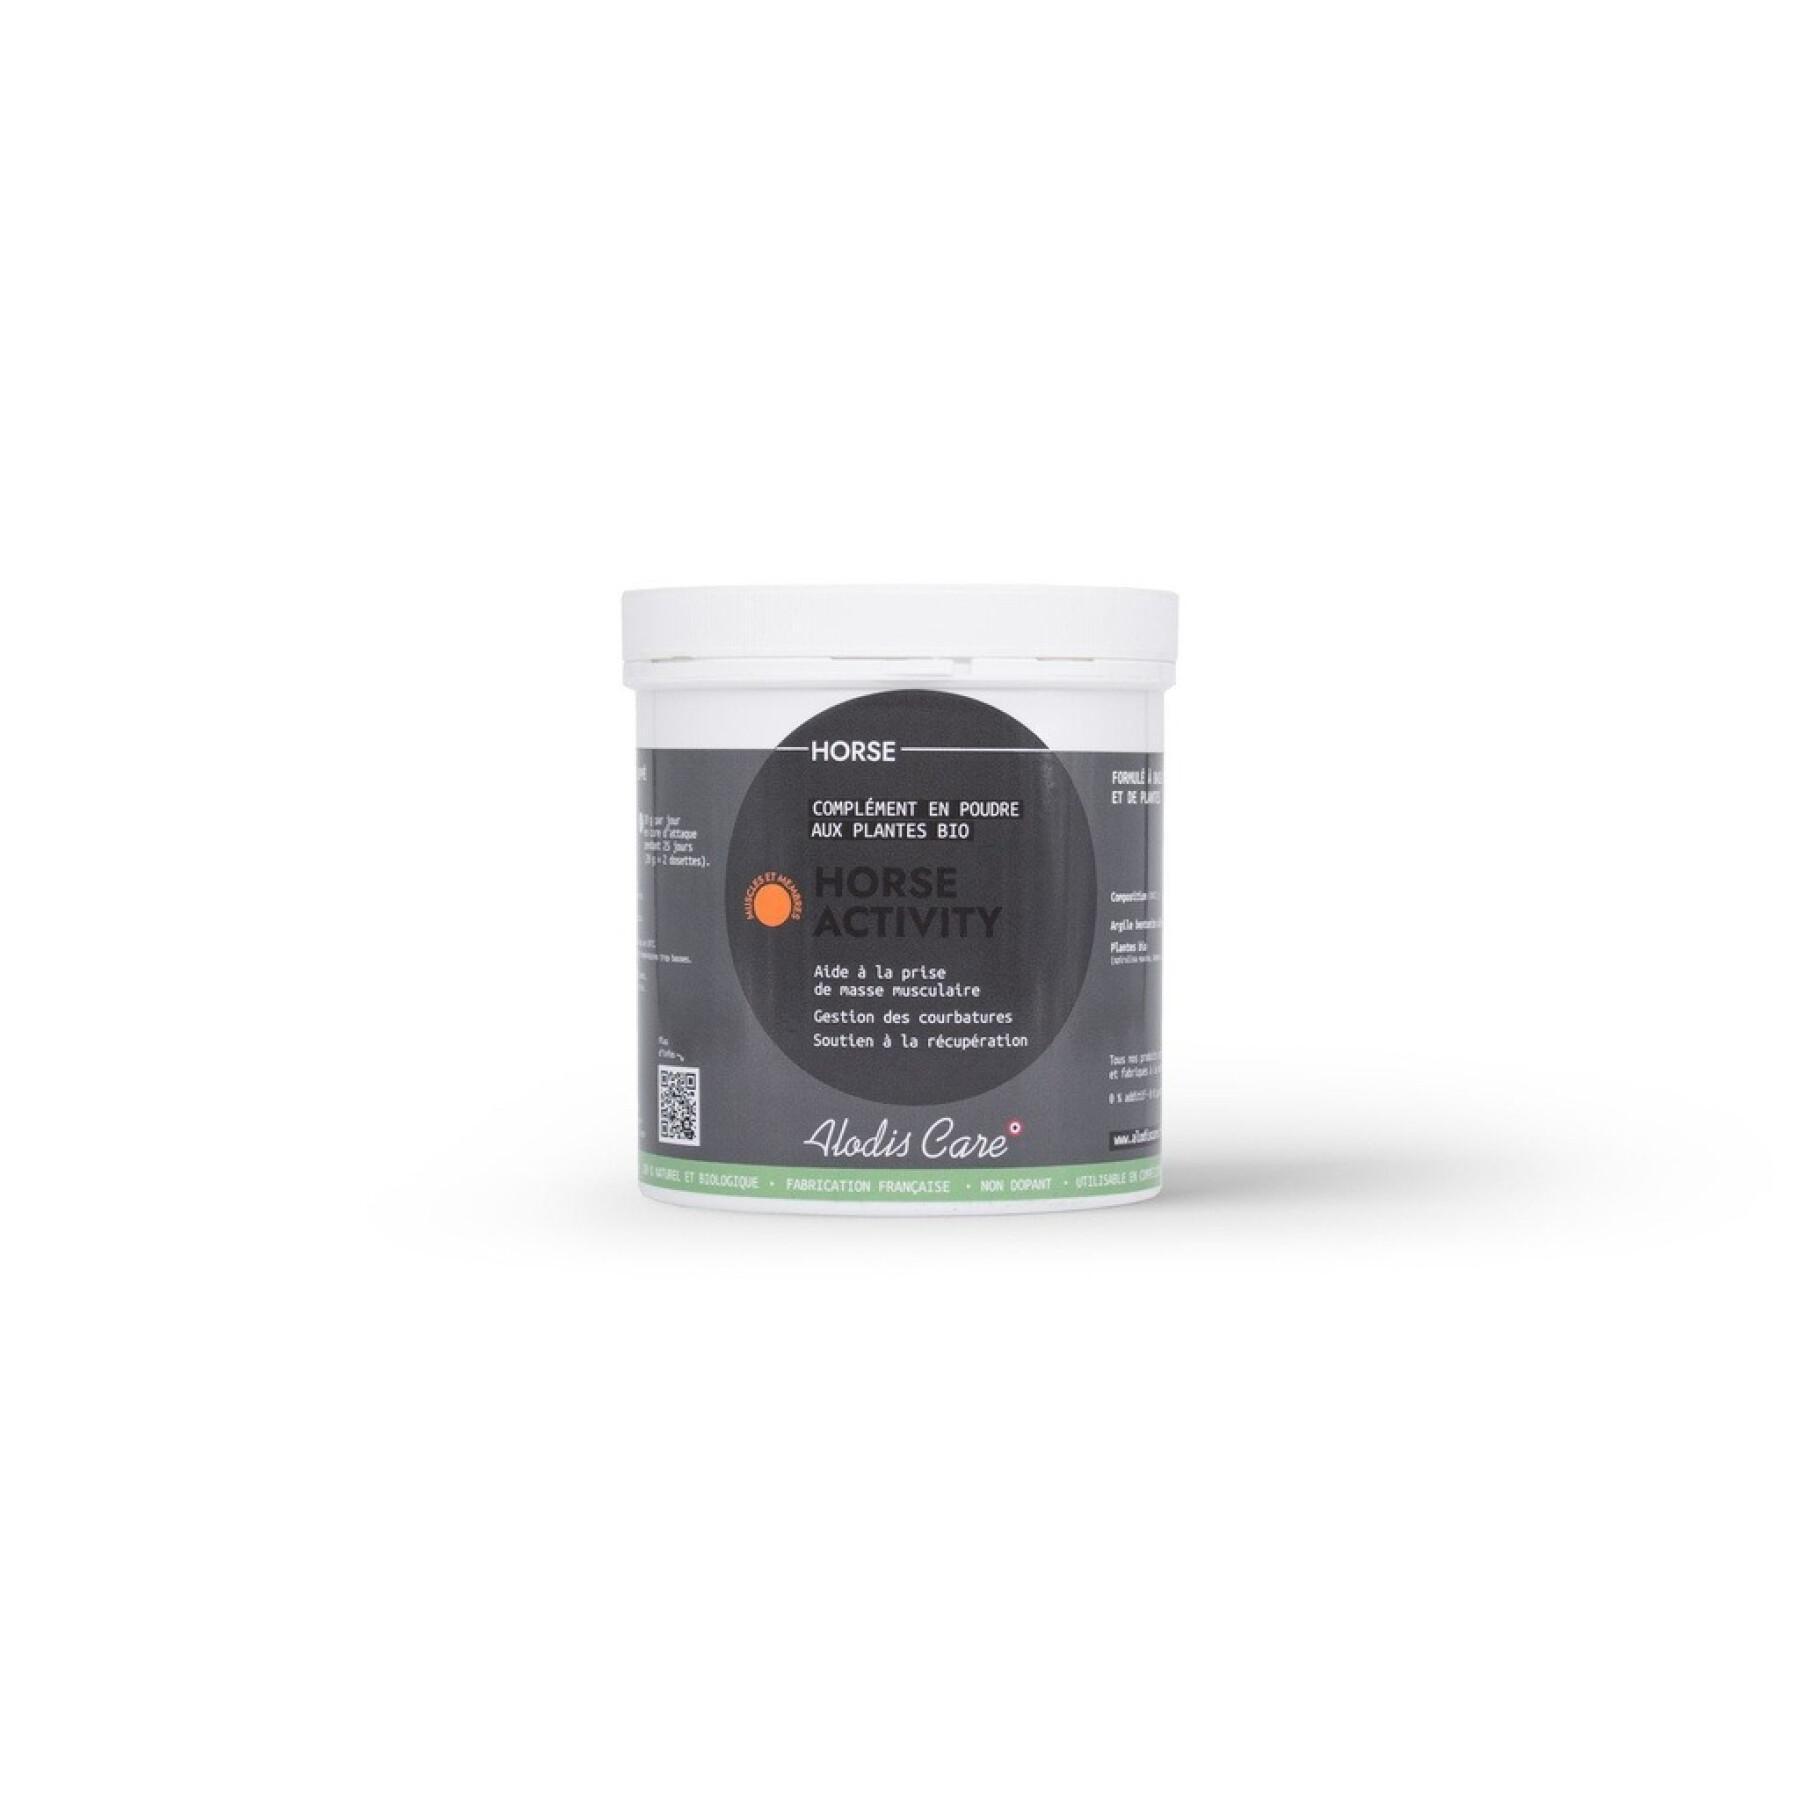 Powdered supplement for sport horses Alodis Care